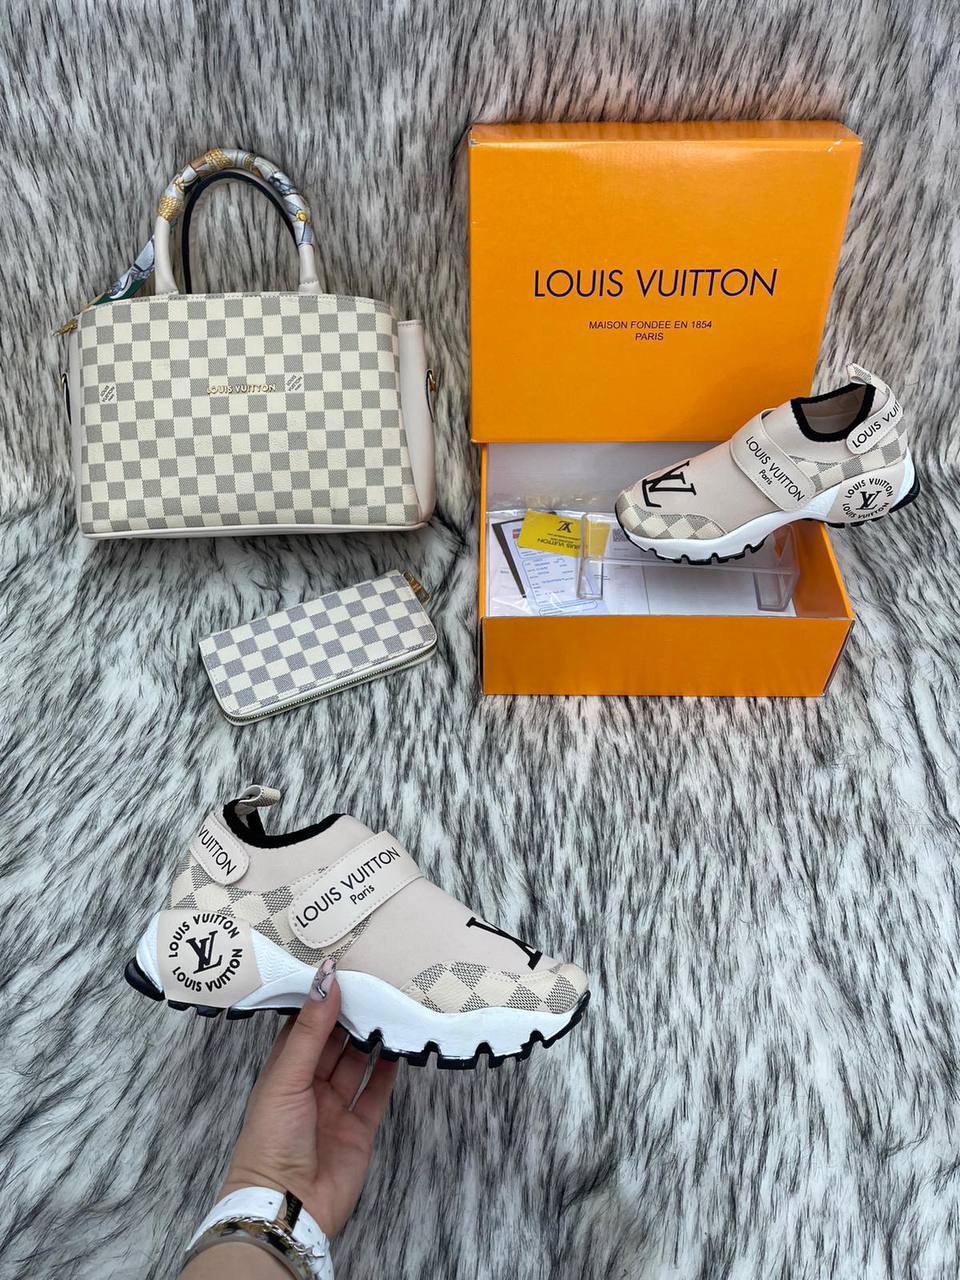 LV COLLECTIONS - HATIM COLLECTIONS  Louis vuitton shoes heels, Louis  vuitton shoes, Louis vuitton bag outfit